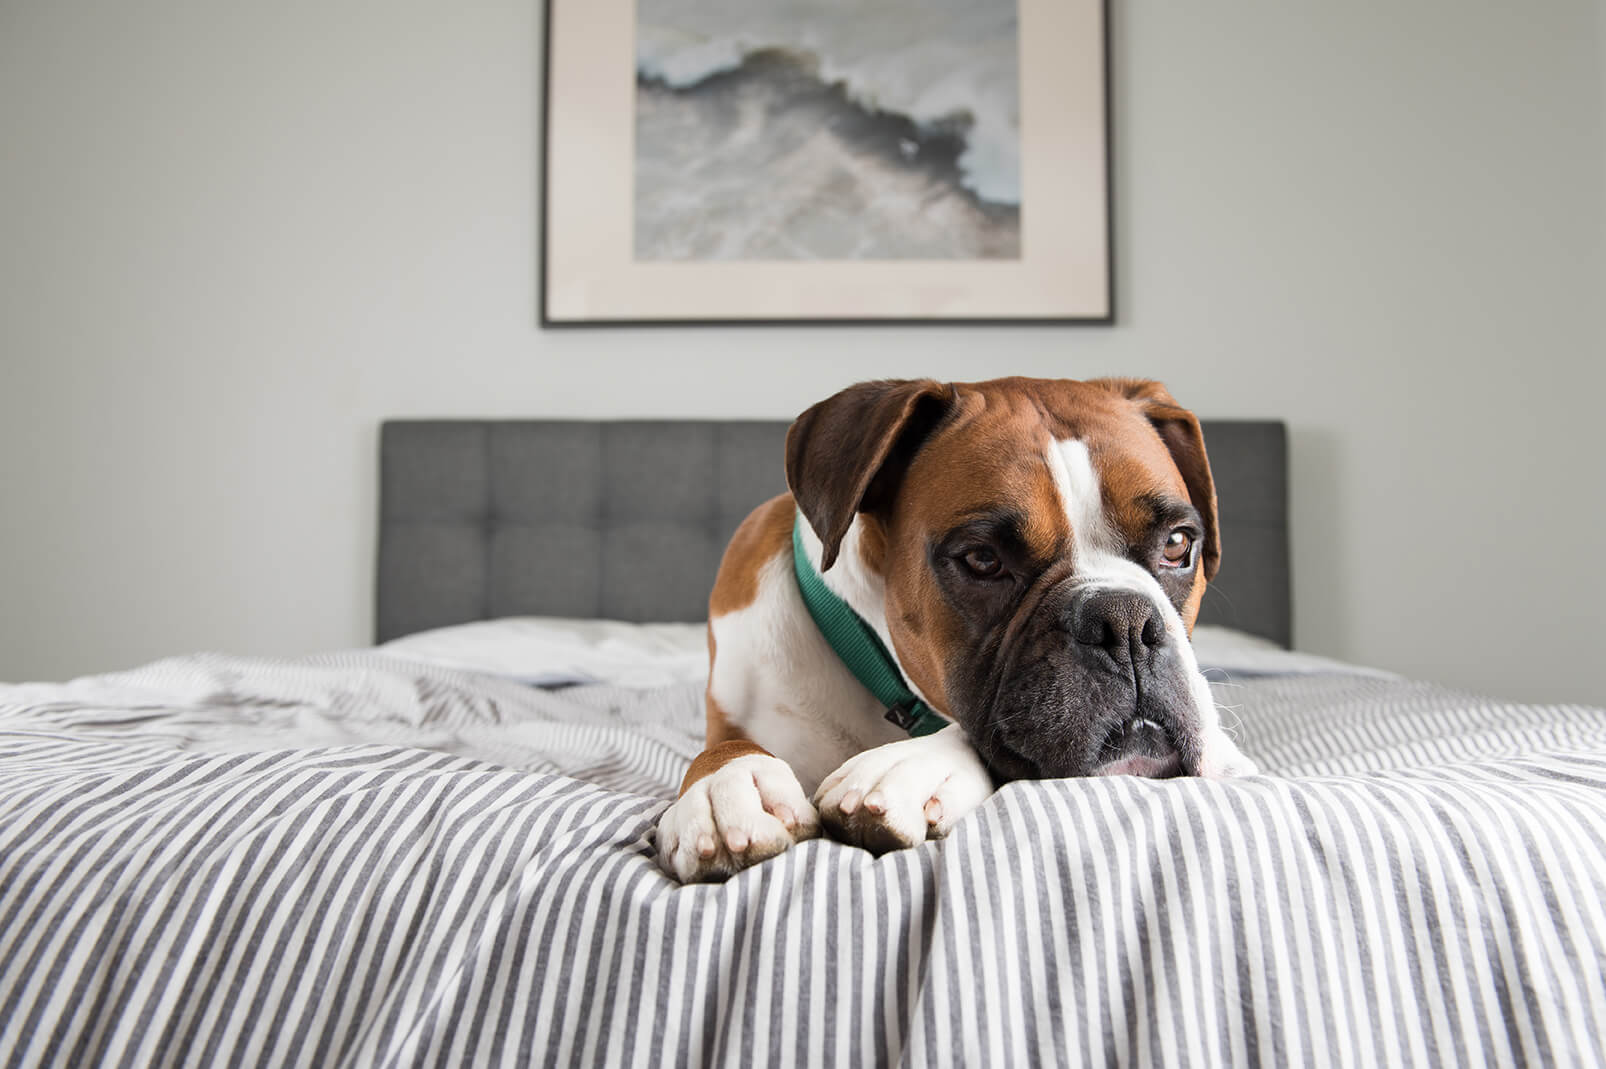 5 ways to keep your dog entertained when home alone